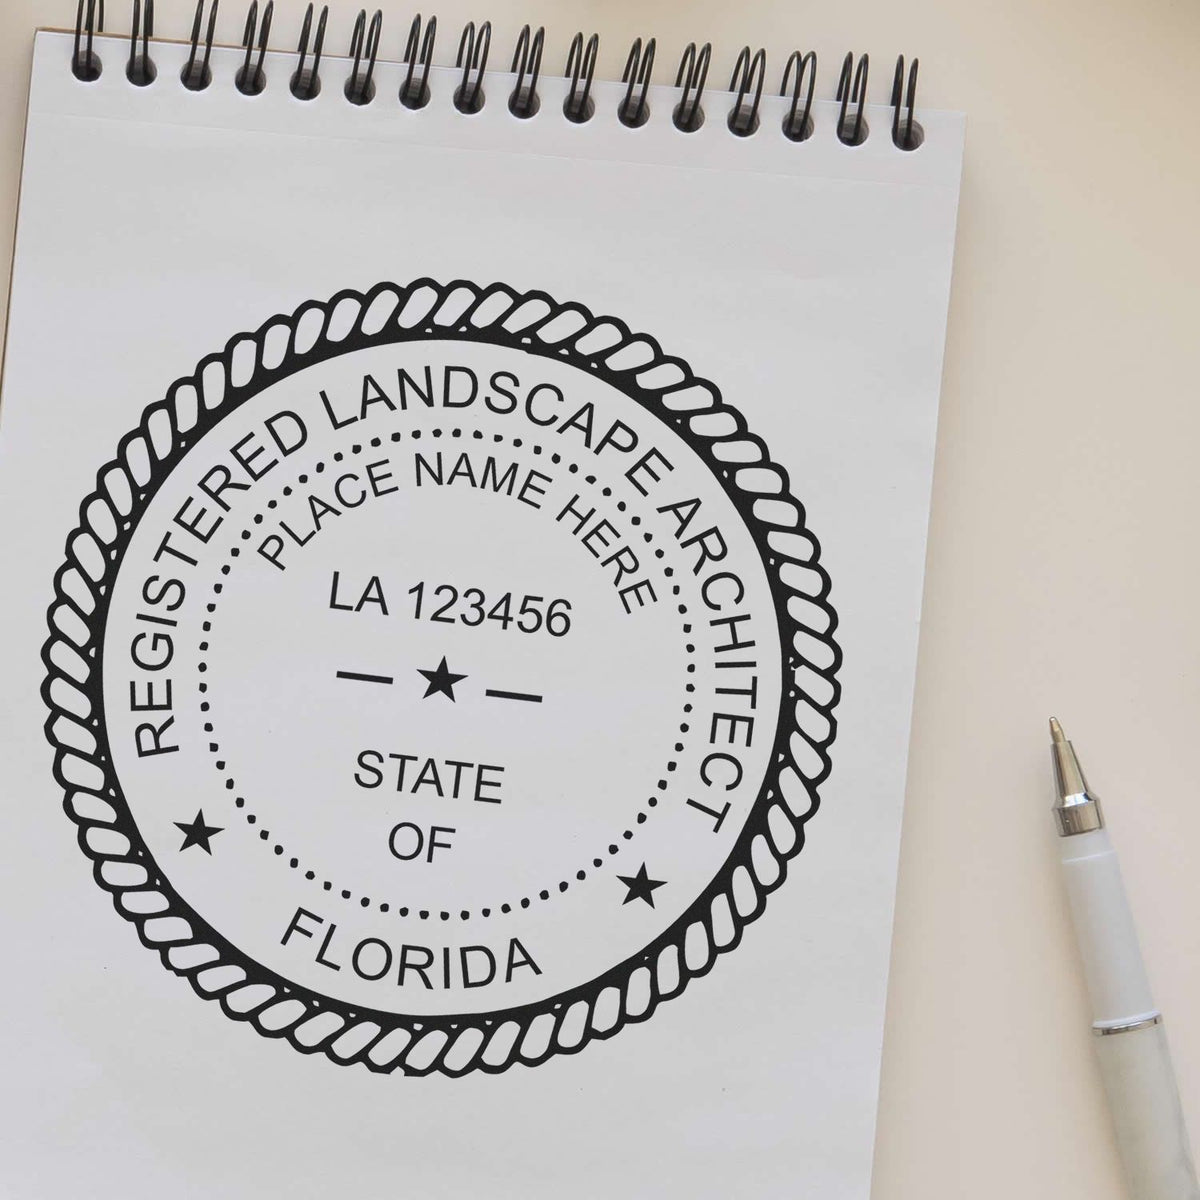 A stamped impression of the Digital Florida Landscape Architect Stamp in this stylish lifestyle photo, setting the tone for a unique and personalized product.